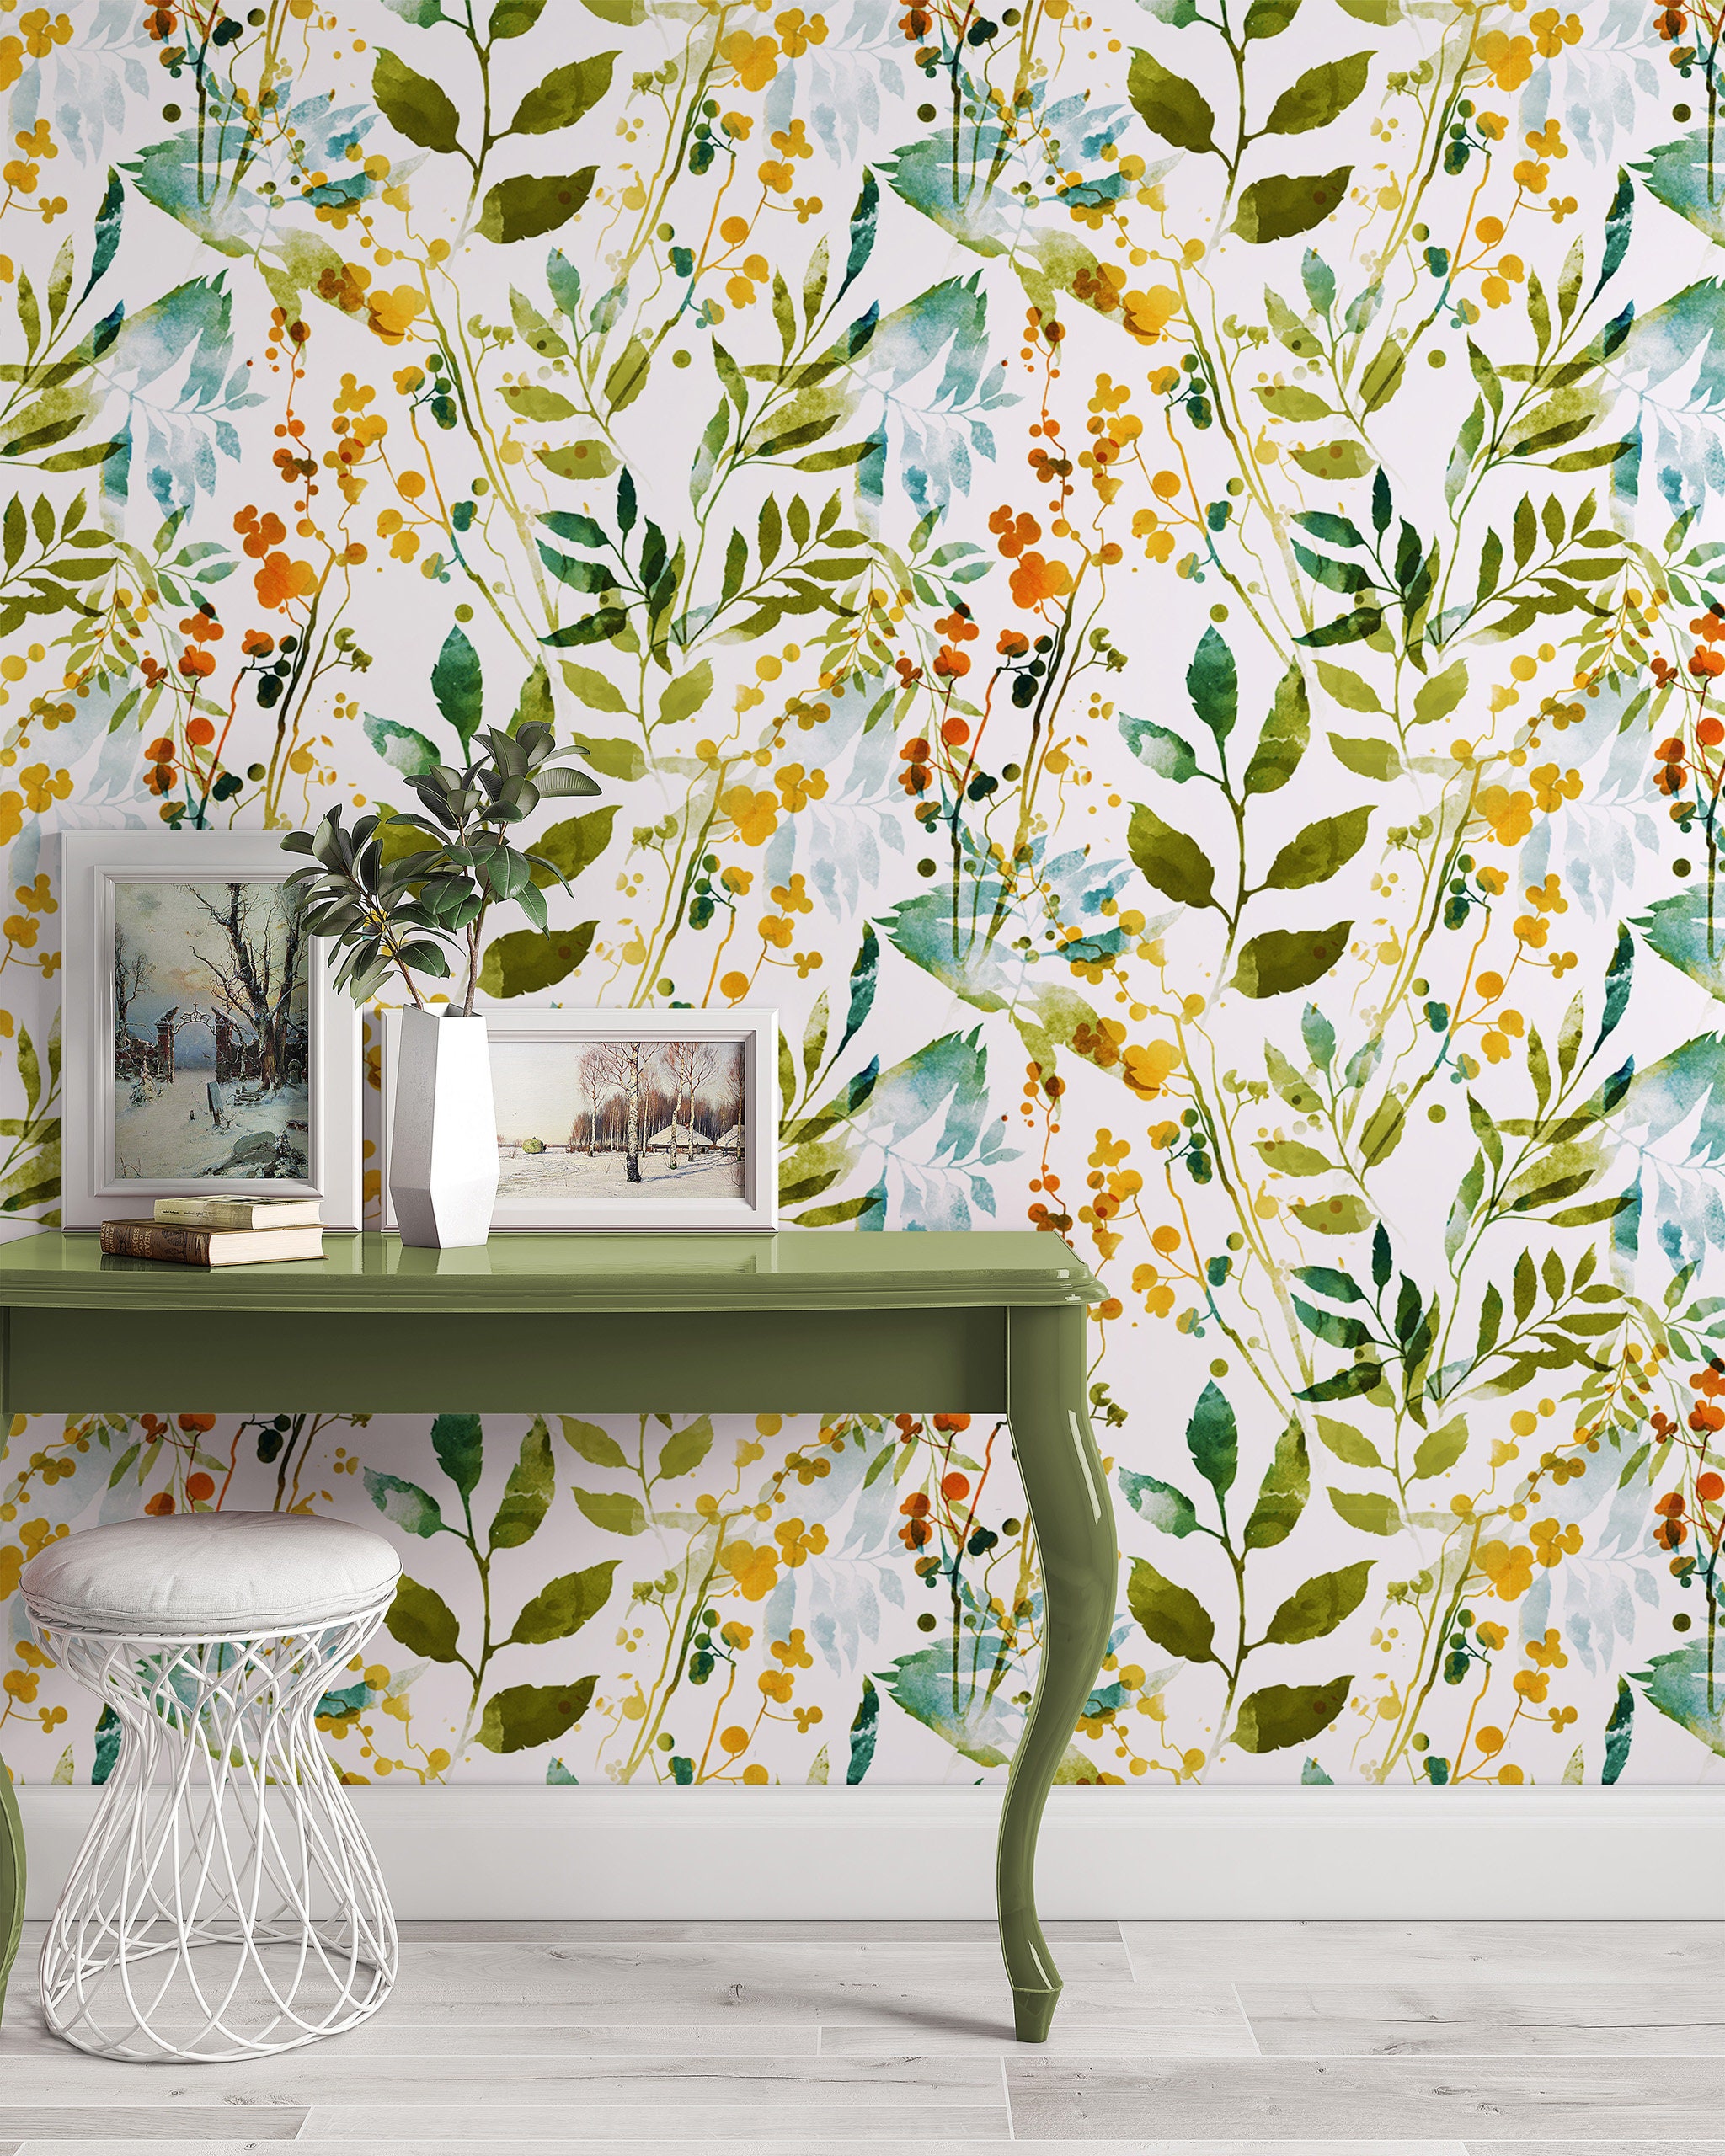 Grey Leaf Wallpaper Peel and Stick Wallpaper Vintage Floral Wall Paper  Removable Self Adhesive Wallpaper Botanical Contact Paper for Cabinets  Shelf Bedroom Bathroom Waterproof 15.7x78.7 Vinyl Roll 